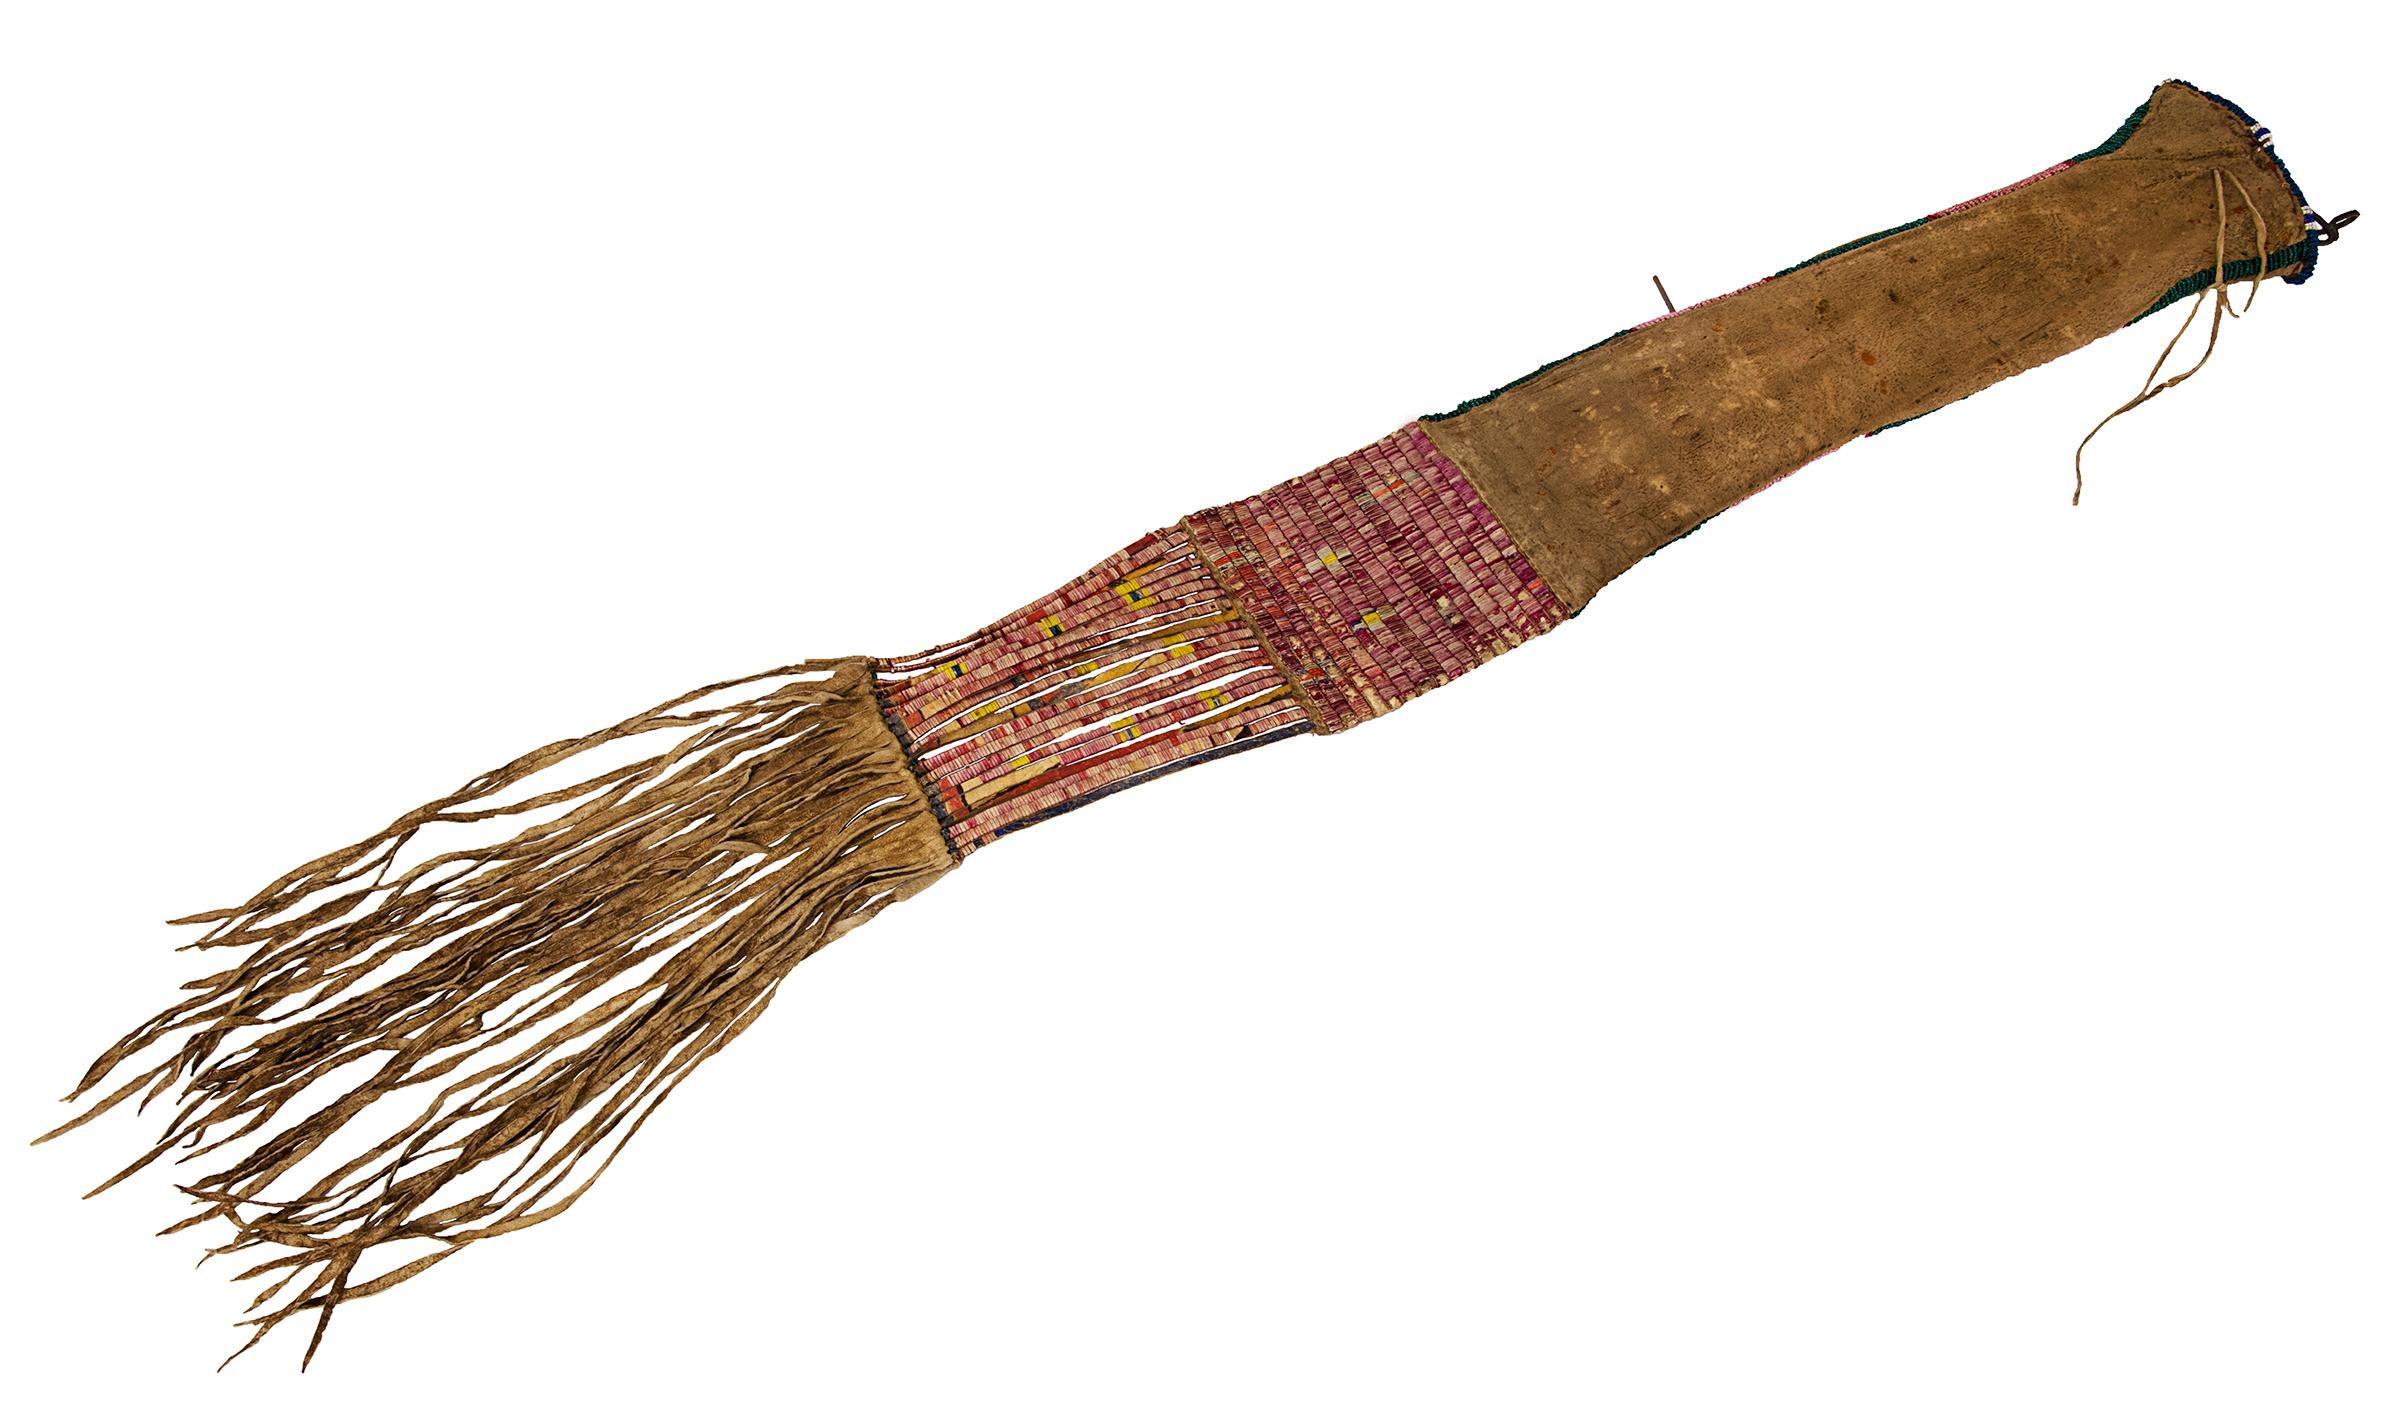 Plains Tobacco bag, circa 1850-1880, native tanned elk or buckskin with a quill work panel with pictorial cross elements, trade beads along the opening and edge in pink, red, green, blue and white, fringed at the bottom.

The Northern Plains